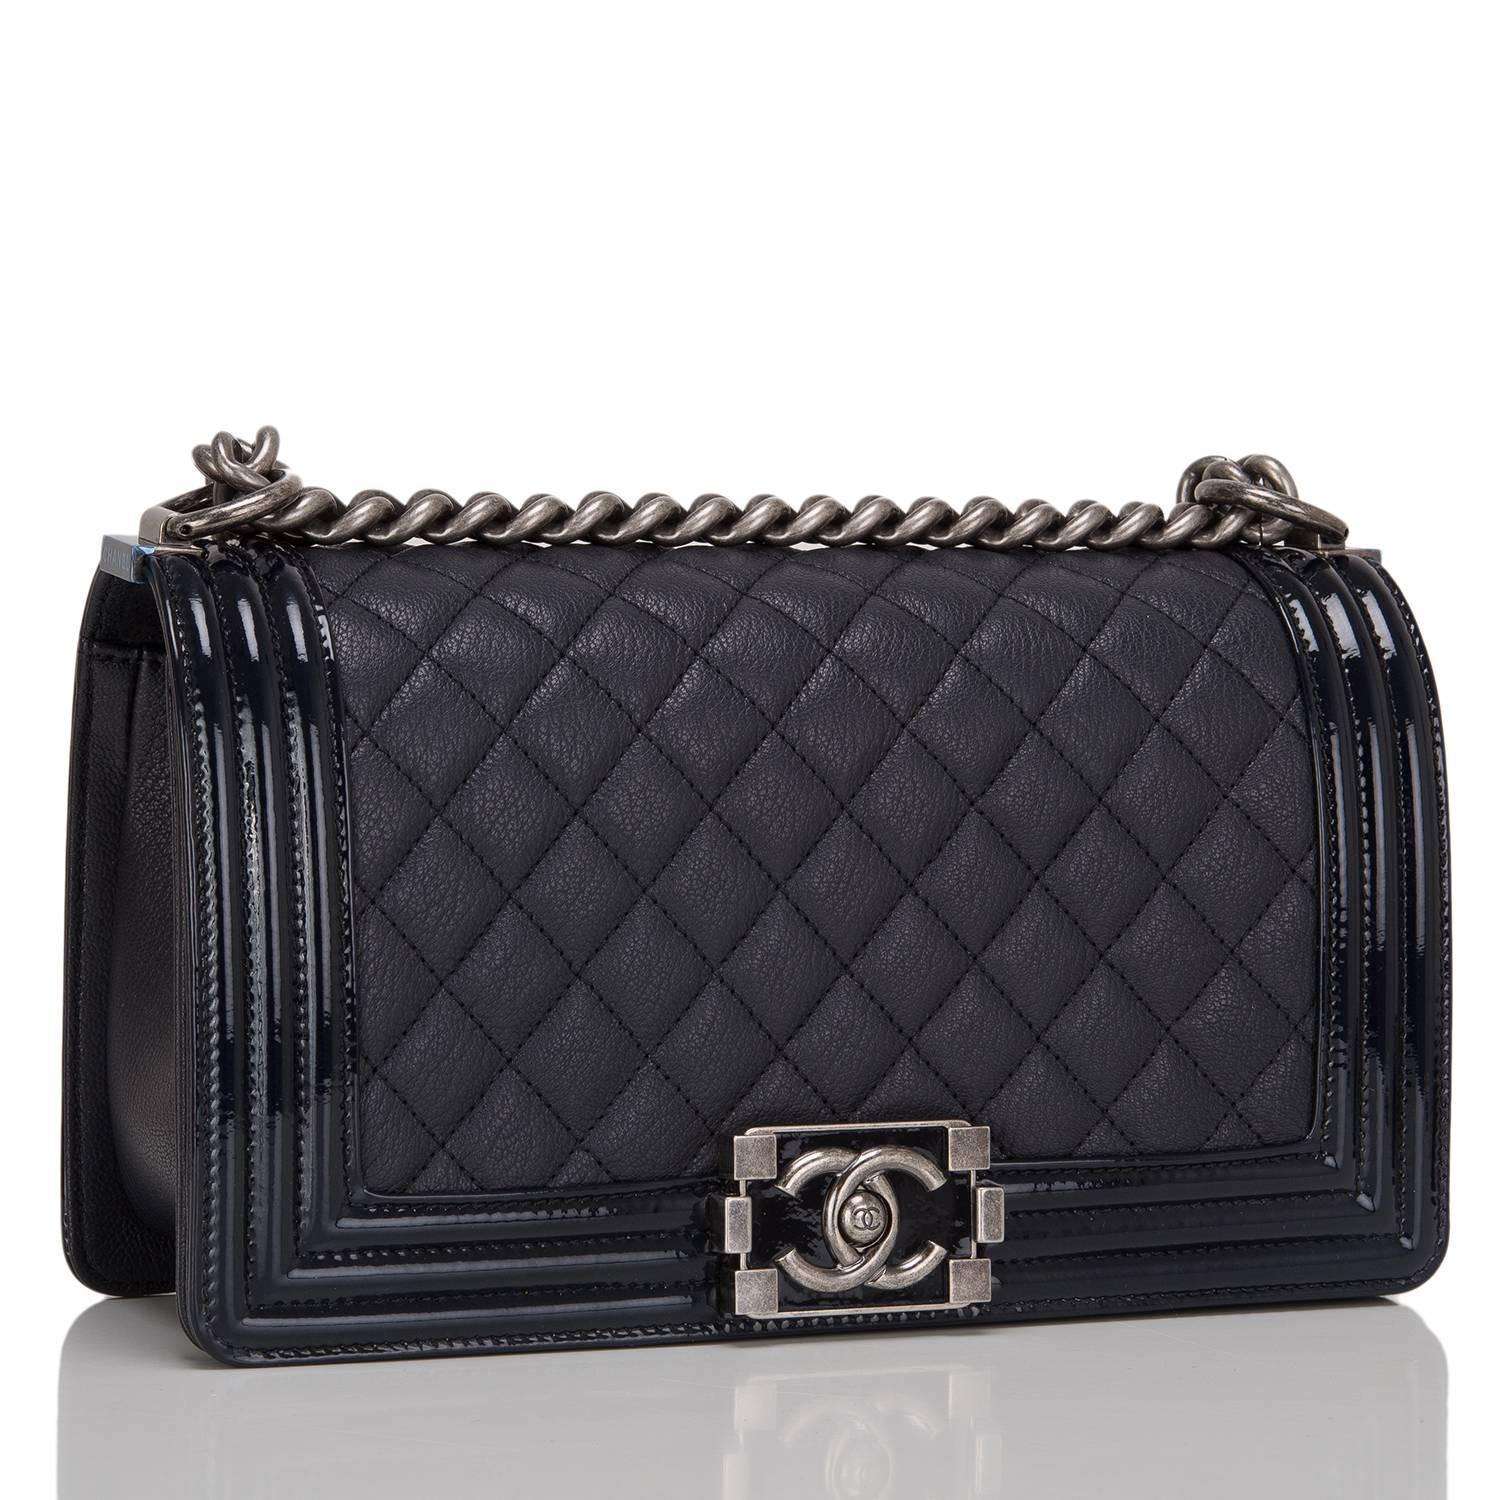  	
Chanel Medium Boy bag of black goatskin (chevre) leather accented with patent leather trim and aged ruthenium hardware.

The bag features a full front flap with a limited edition Le Boy push lock closure of a glossy black lacquer and ruthenium